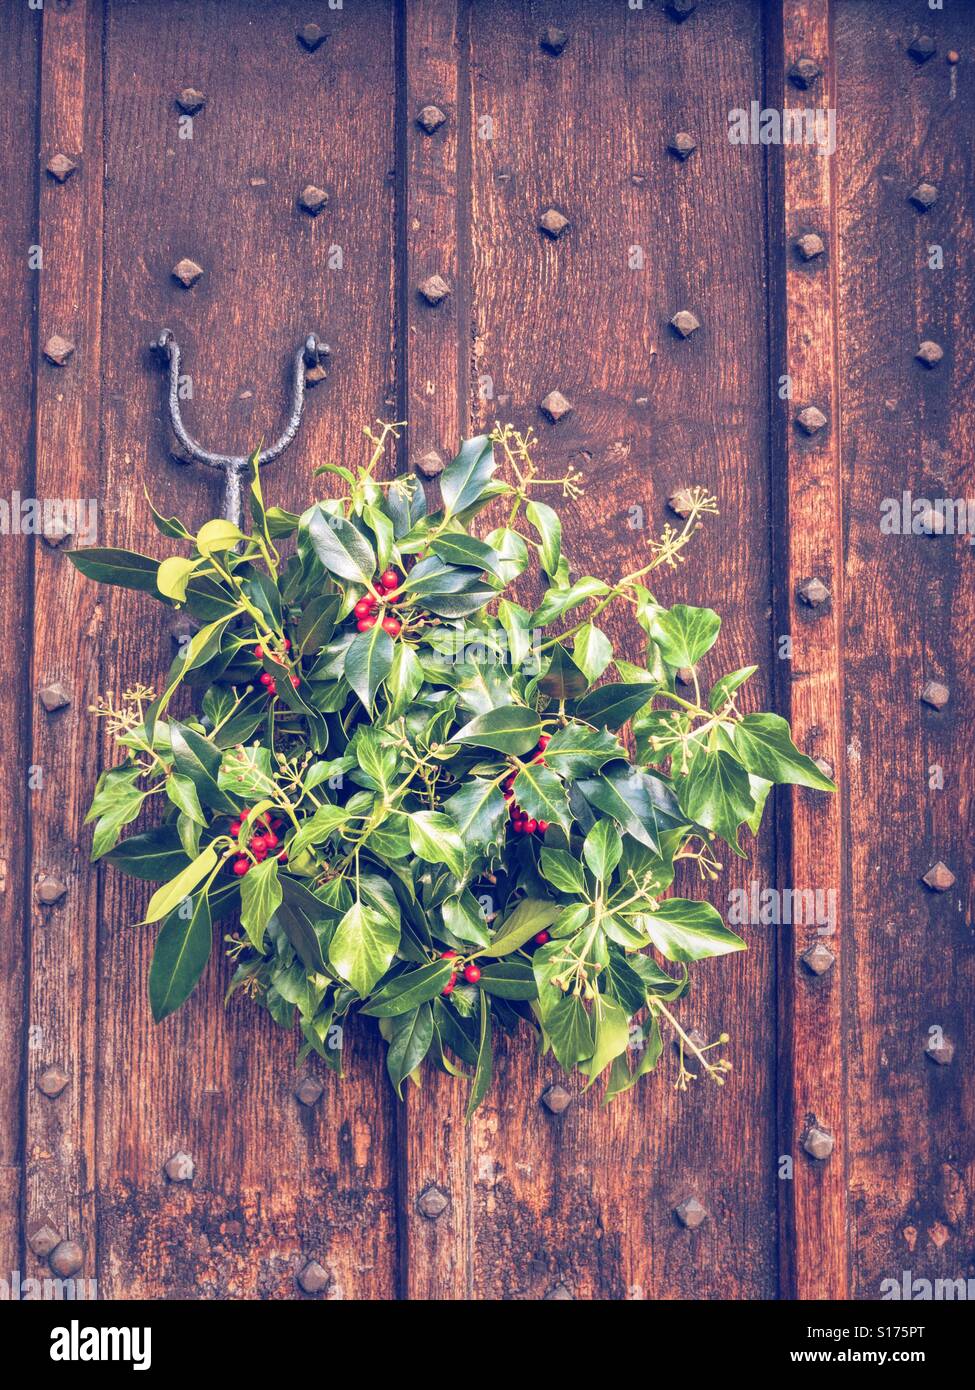 BAKEWELL, ENGLAND - NOVEMBER 4: Holly and mistletoe Christmas wreath hanging on wooden door in Britain. In Bakewell, England. On 4th December 2016. Stock Photo